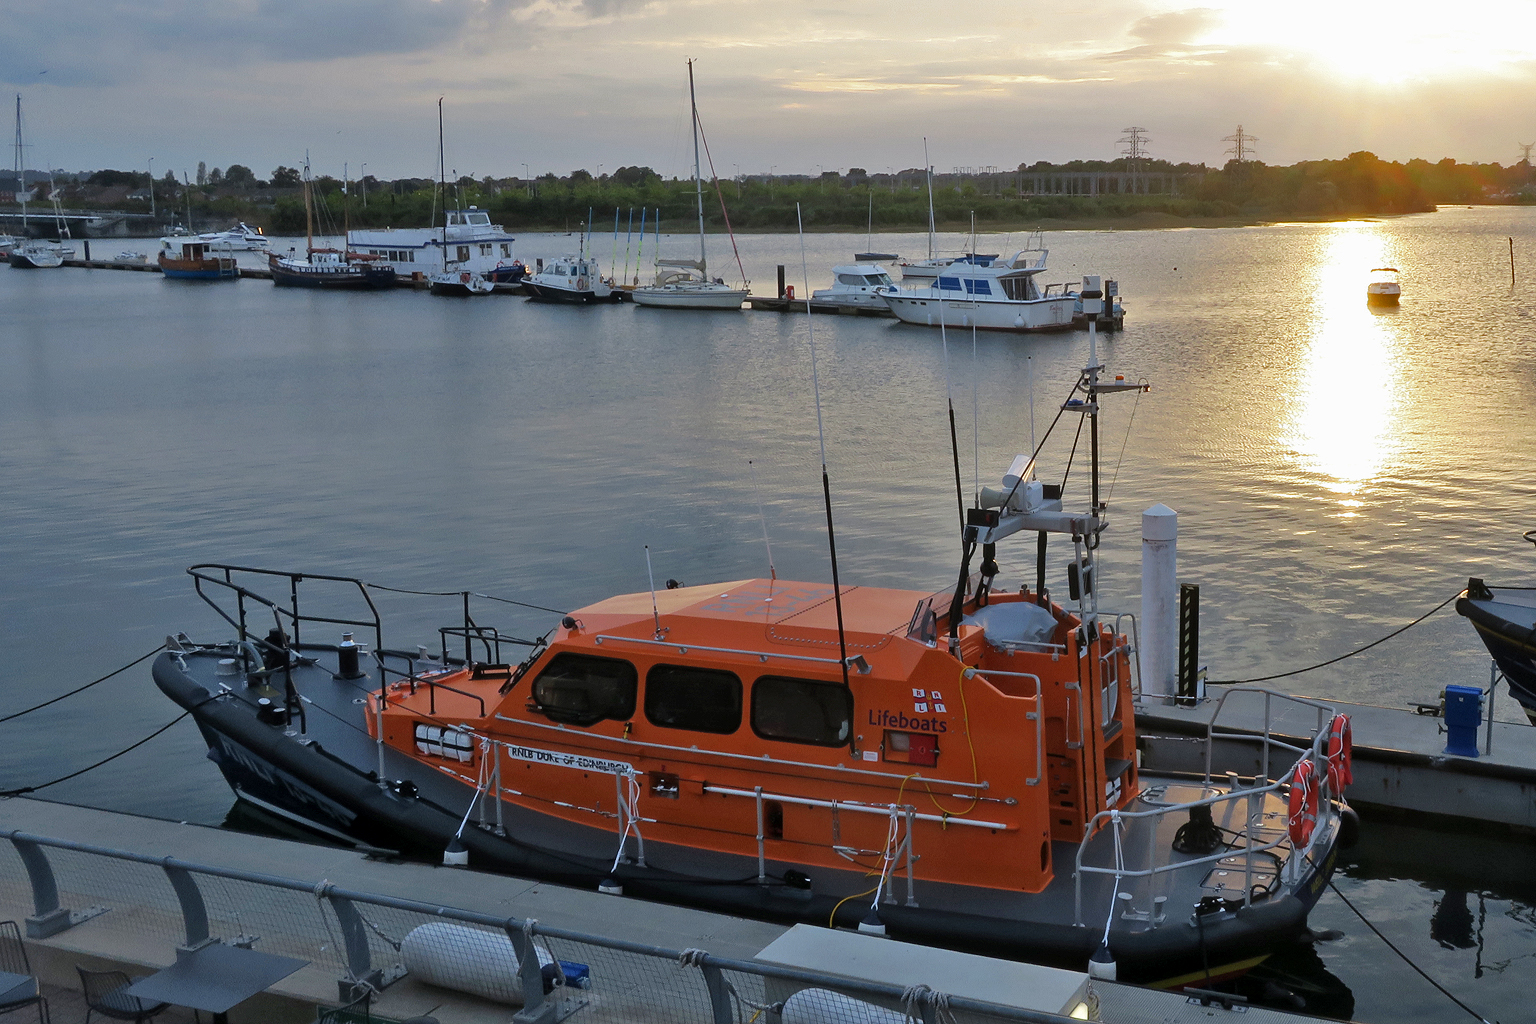 Alongside at the Lifeboat college